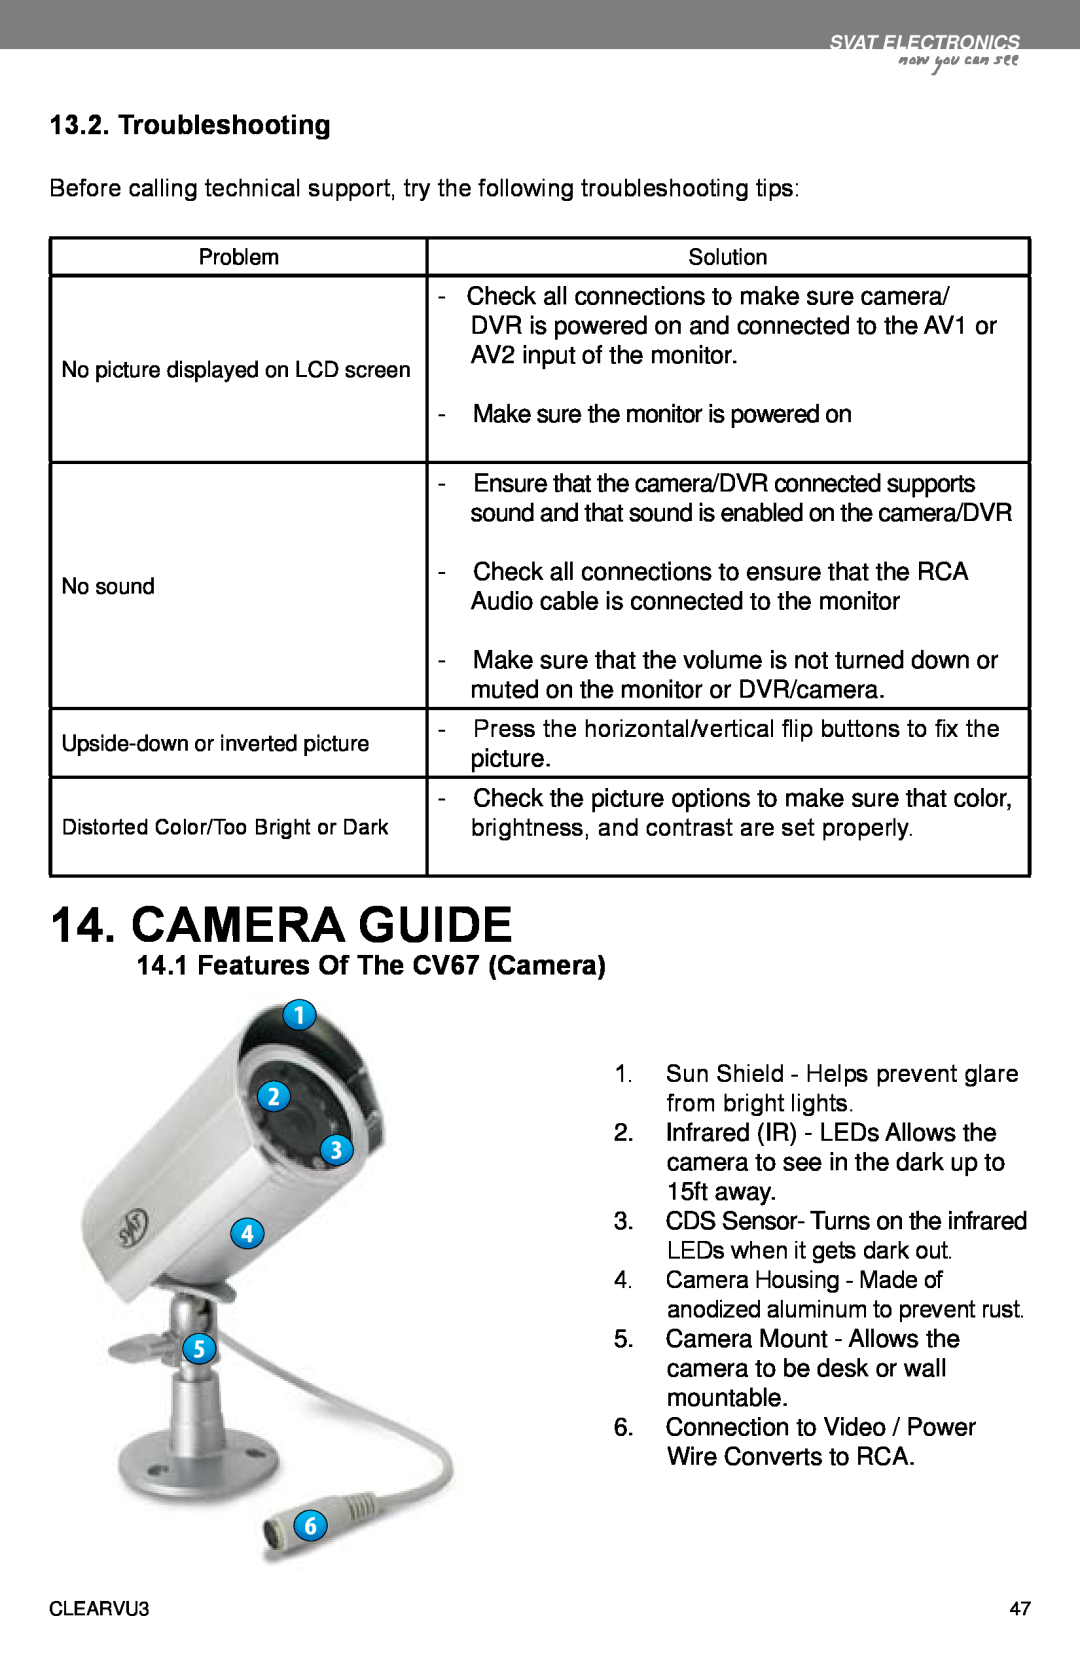 SVAT Electronics CLEARVU3 Camera Guide, Troubleshooting, 14.1Features Of The CV67 Camera, now you can see 